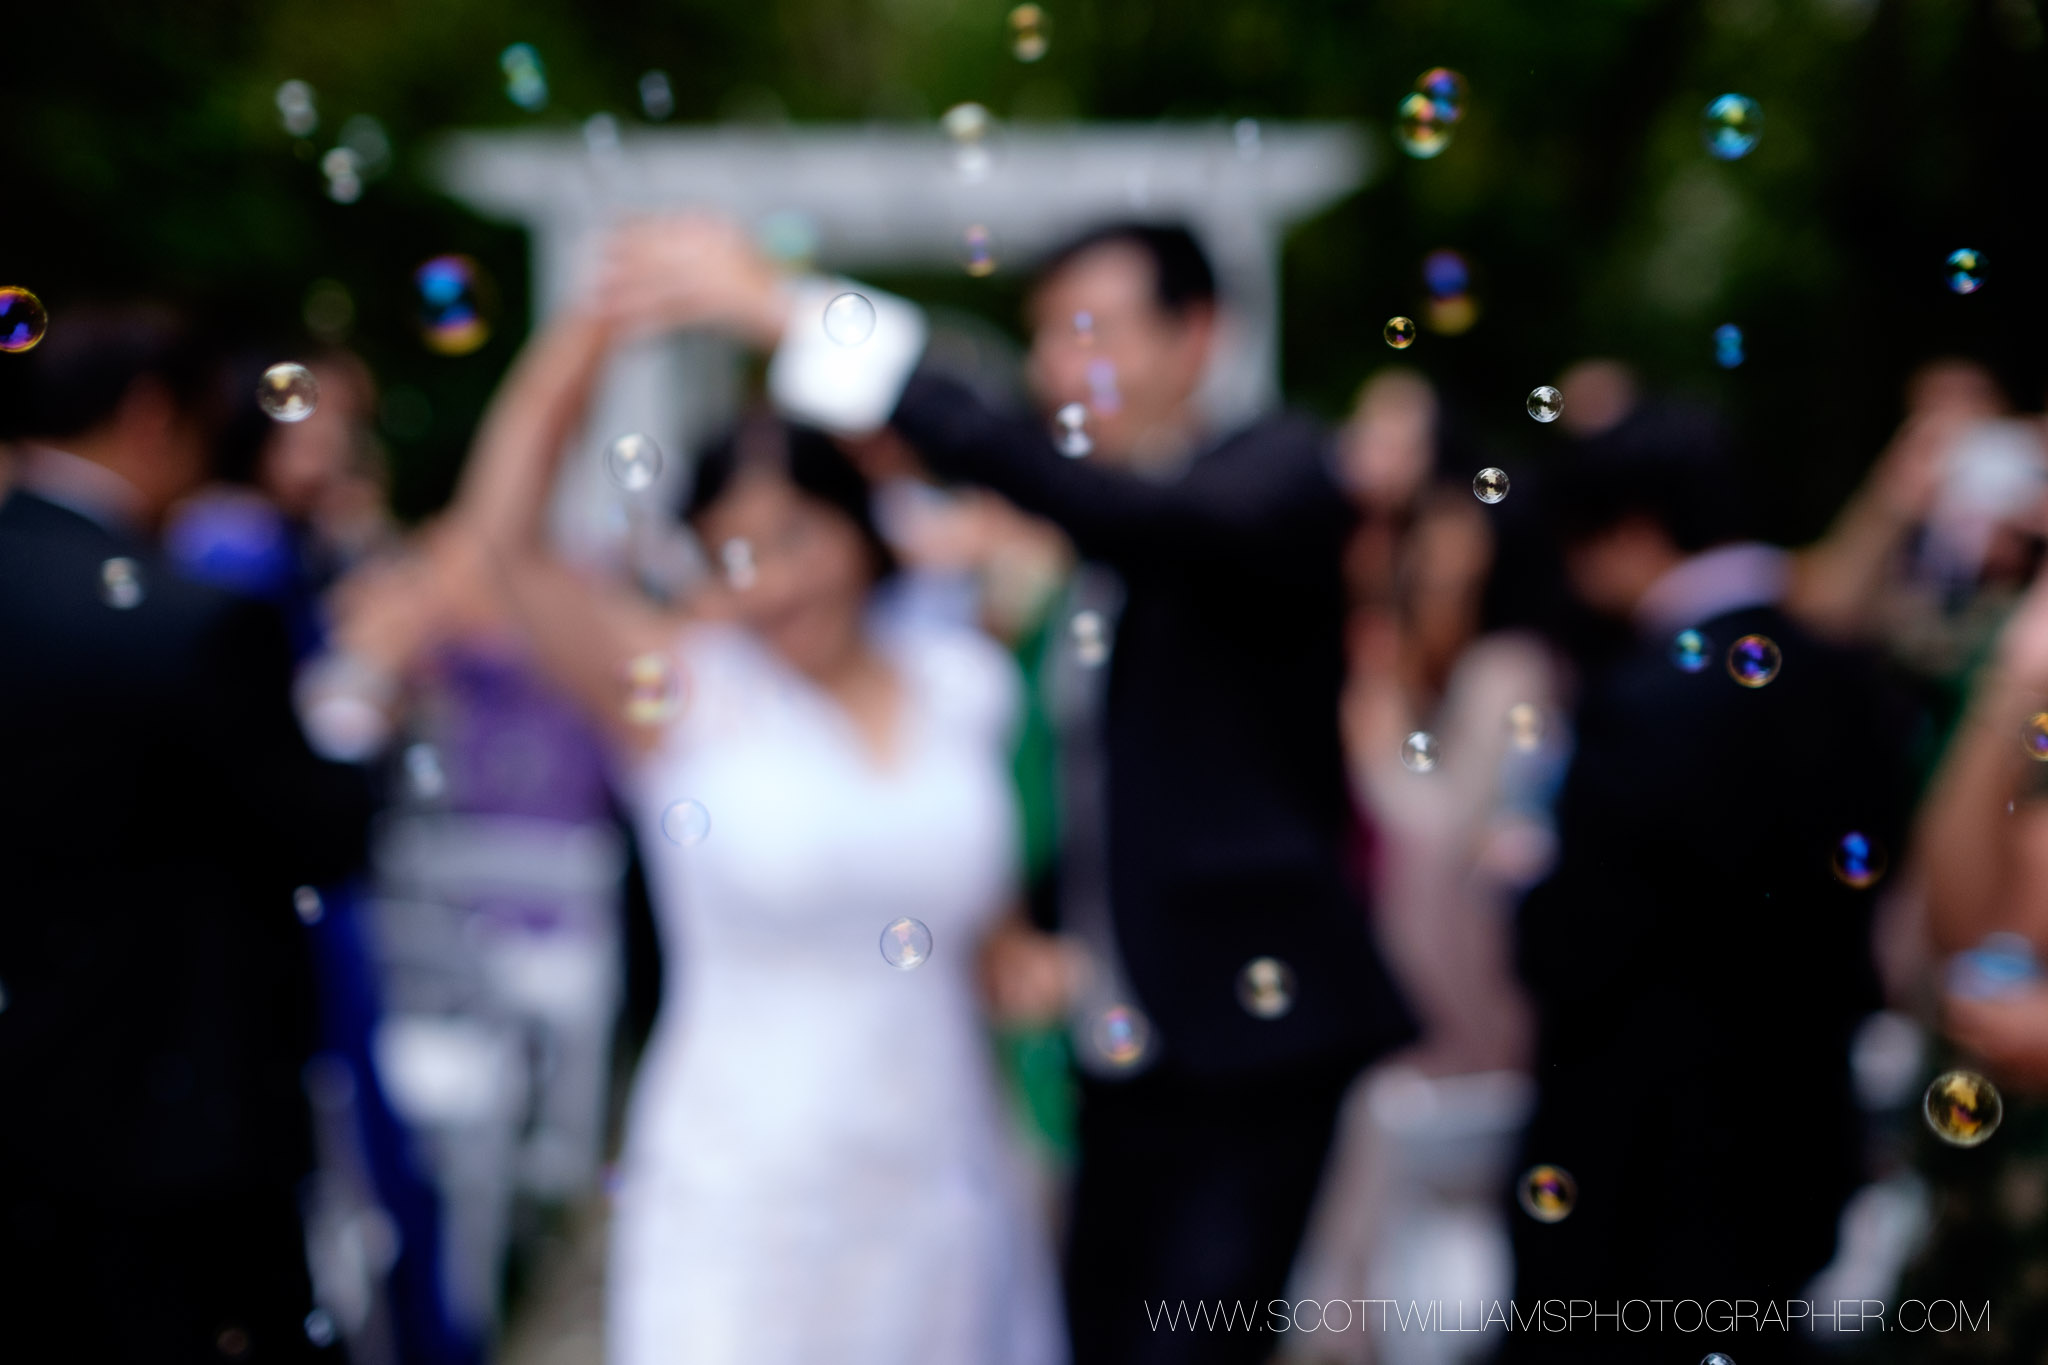  Guests blow bubbles as the bride and groom dance their way up the aisle after their outdoor wedding ceremony at the Ancaster Mill in Ancaster, Ontario.&nbsp; 